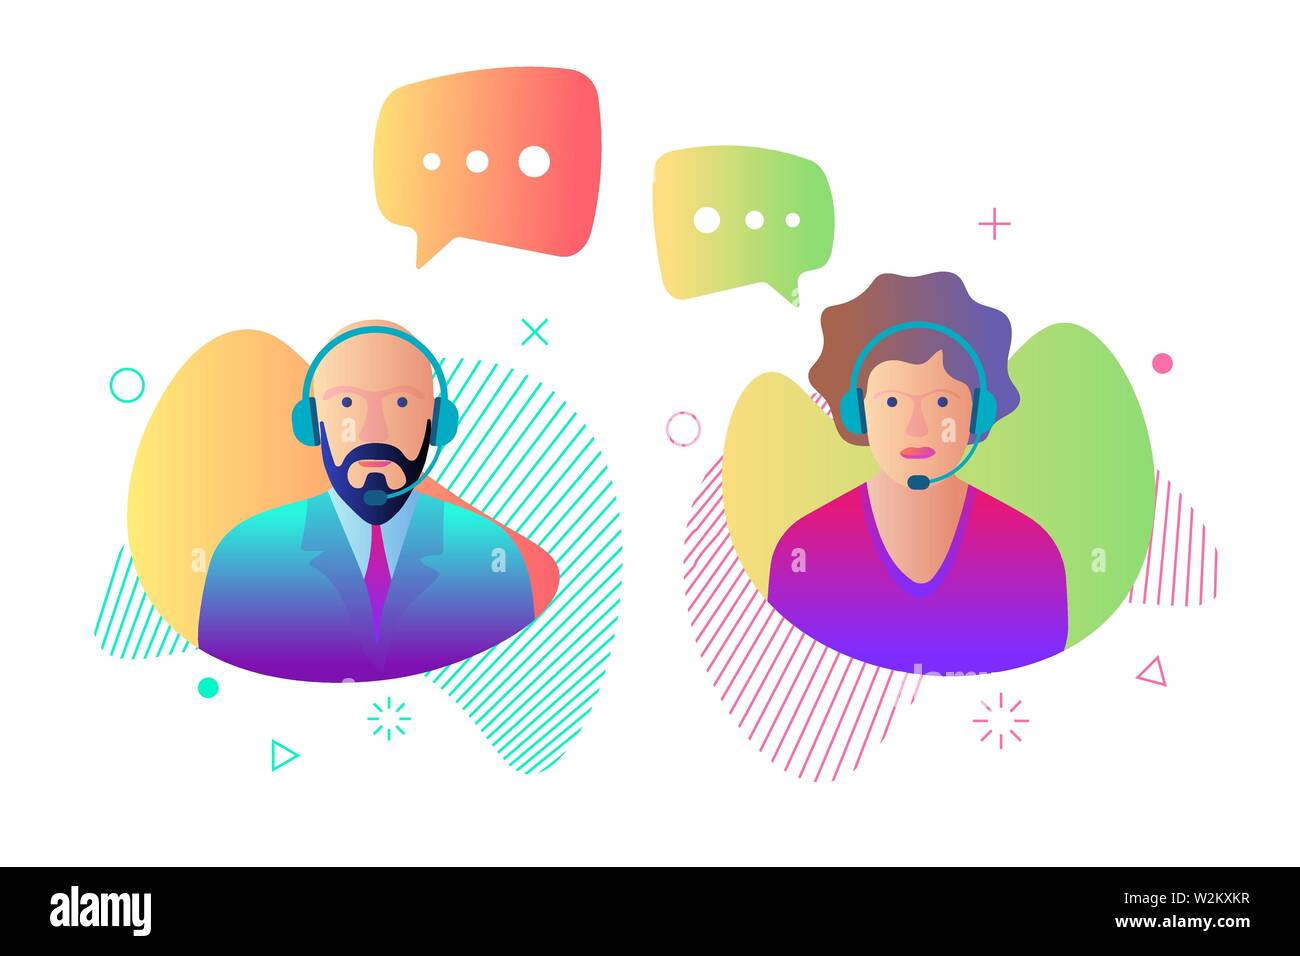 Call center customer online help service icon set. Male and female online assistant working in headphones and speech bubbles. Support character operator gradient vector illustration Stock Vector